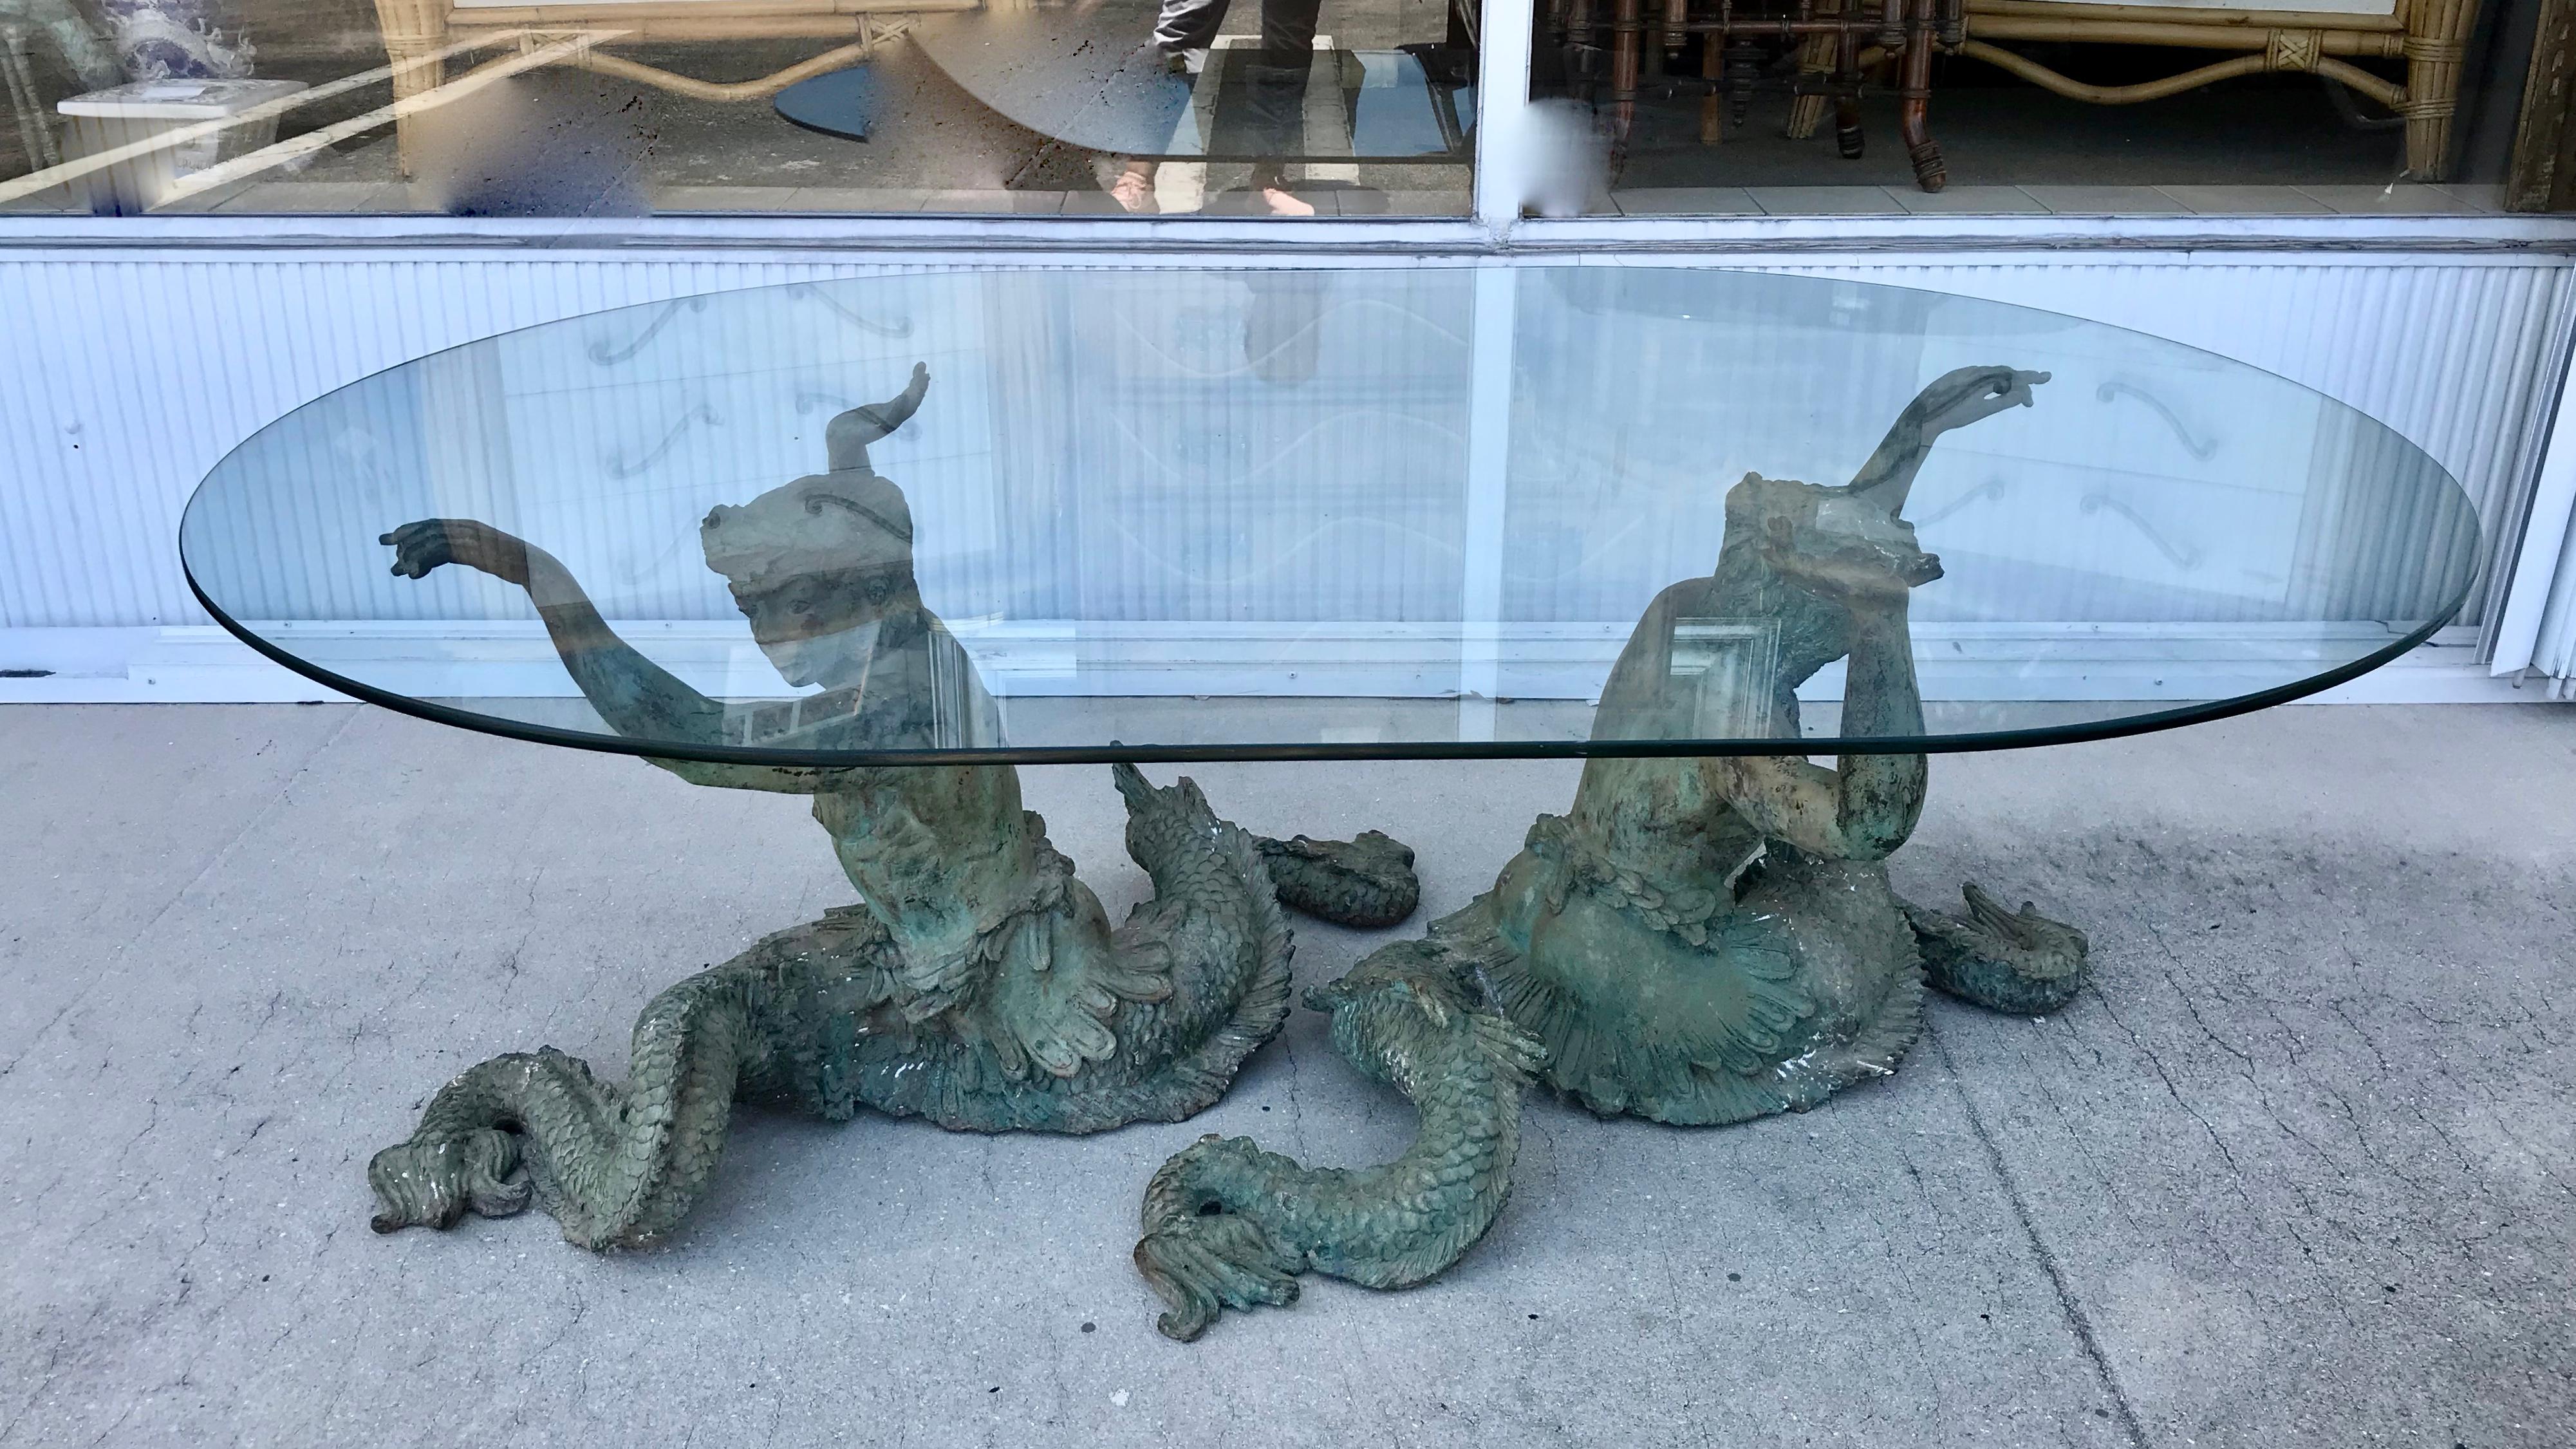 The table is fashioned with large mythologic mermen with enormous fish-like tails.
The mermen are designed to hold a large piece of glass (as pictured).
Each figure is nearly 3 feet long.
This is an especially dramatic table
Dramatic in scale,